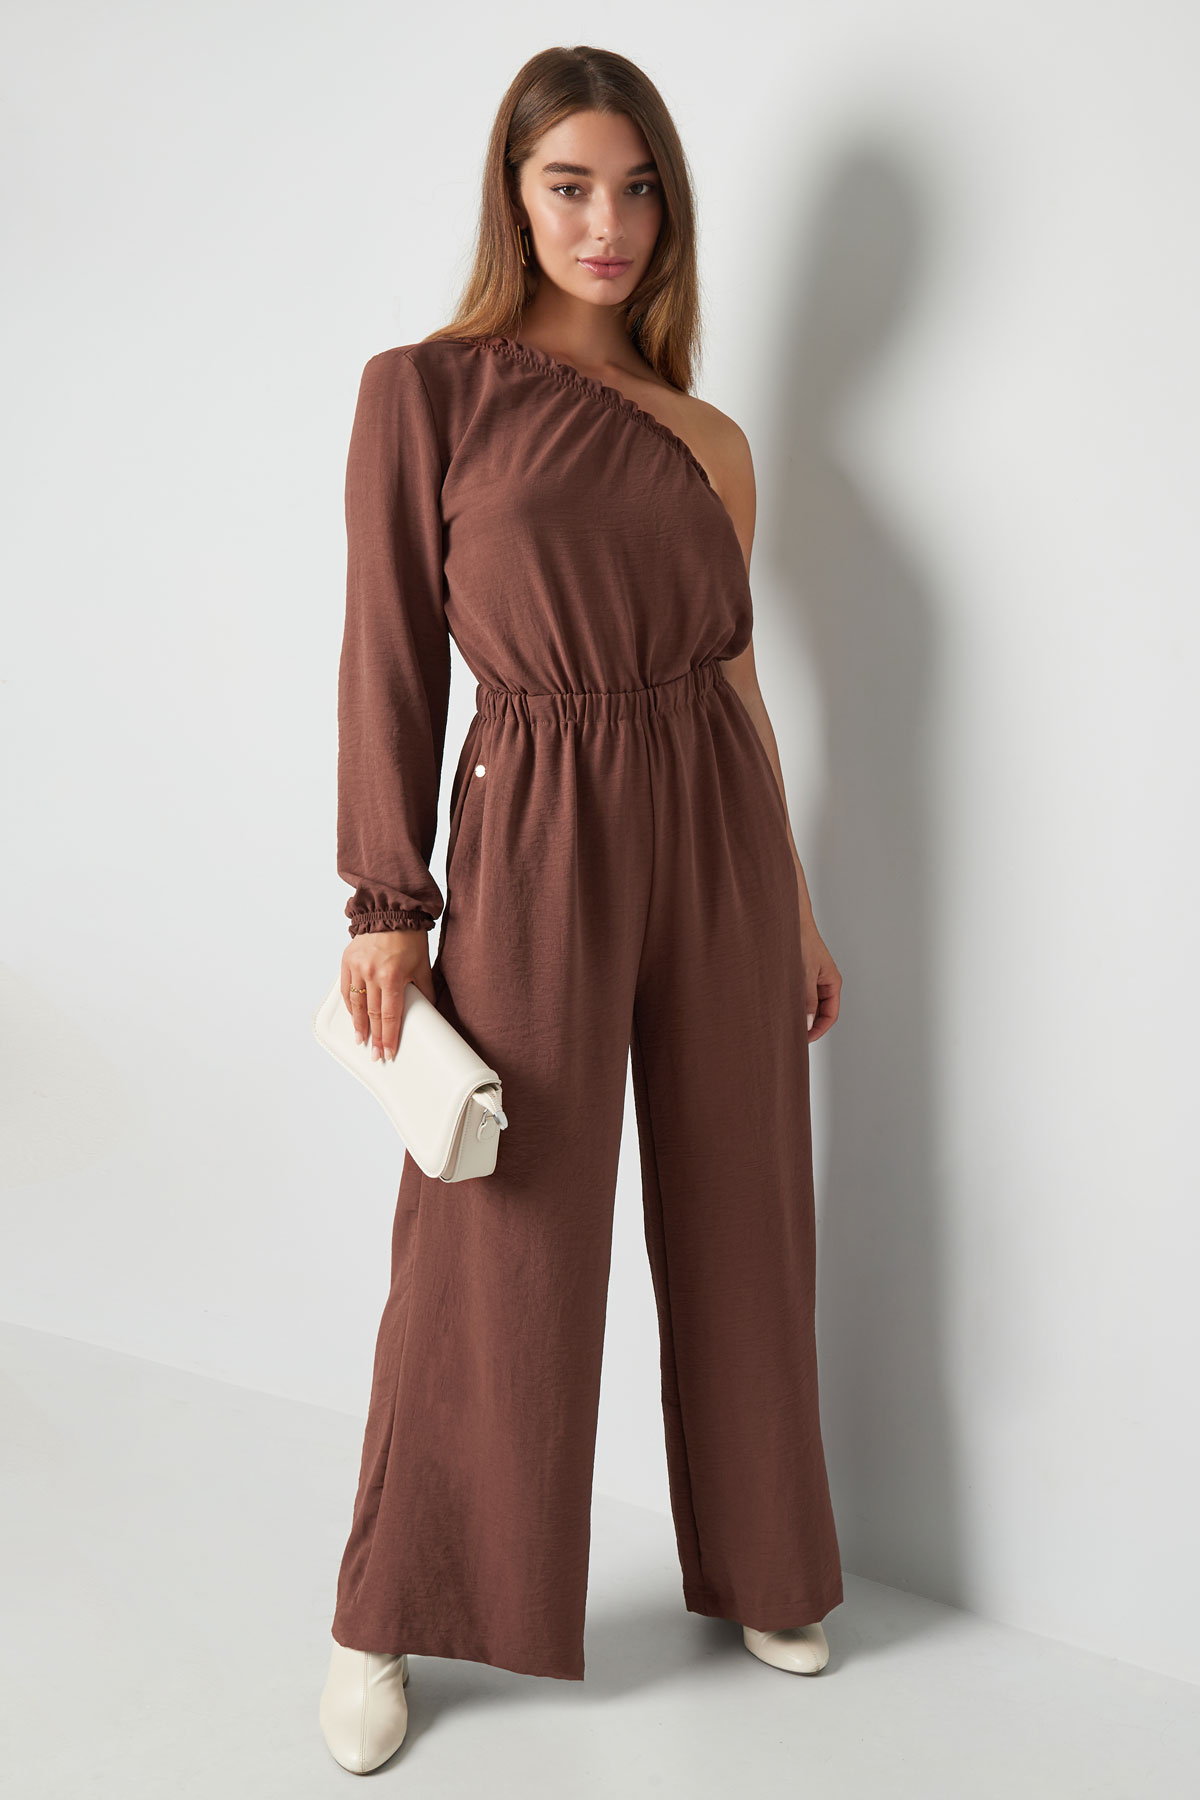 Jumpsuit one-shoulder - mustard yellow Picture4